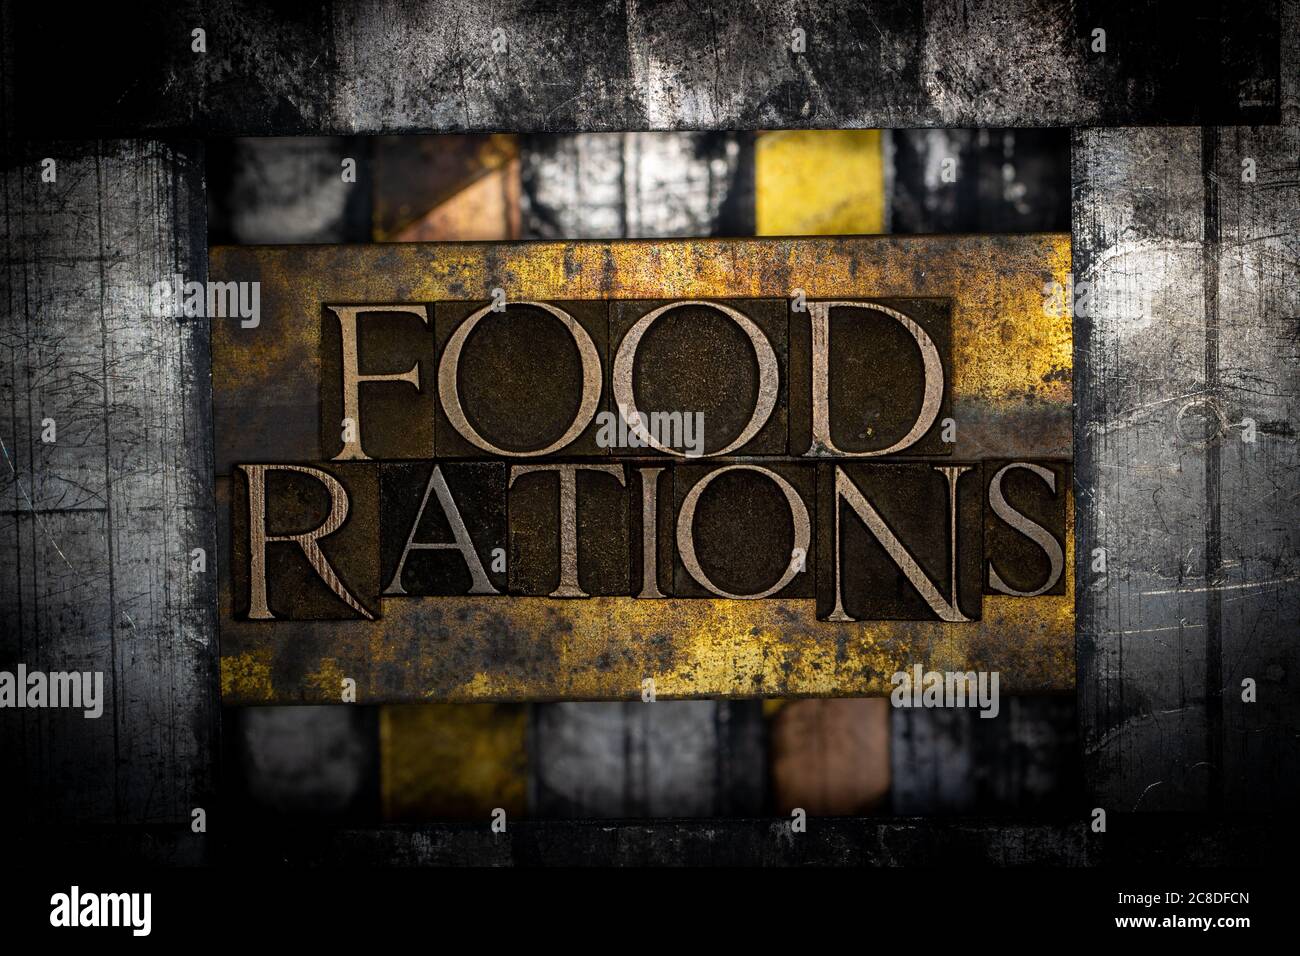 Food Rations text formed with real authentic typeset letters on vintage textured silver grunge copper and gold background Stock Photo